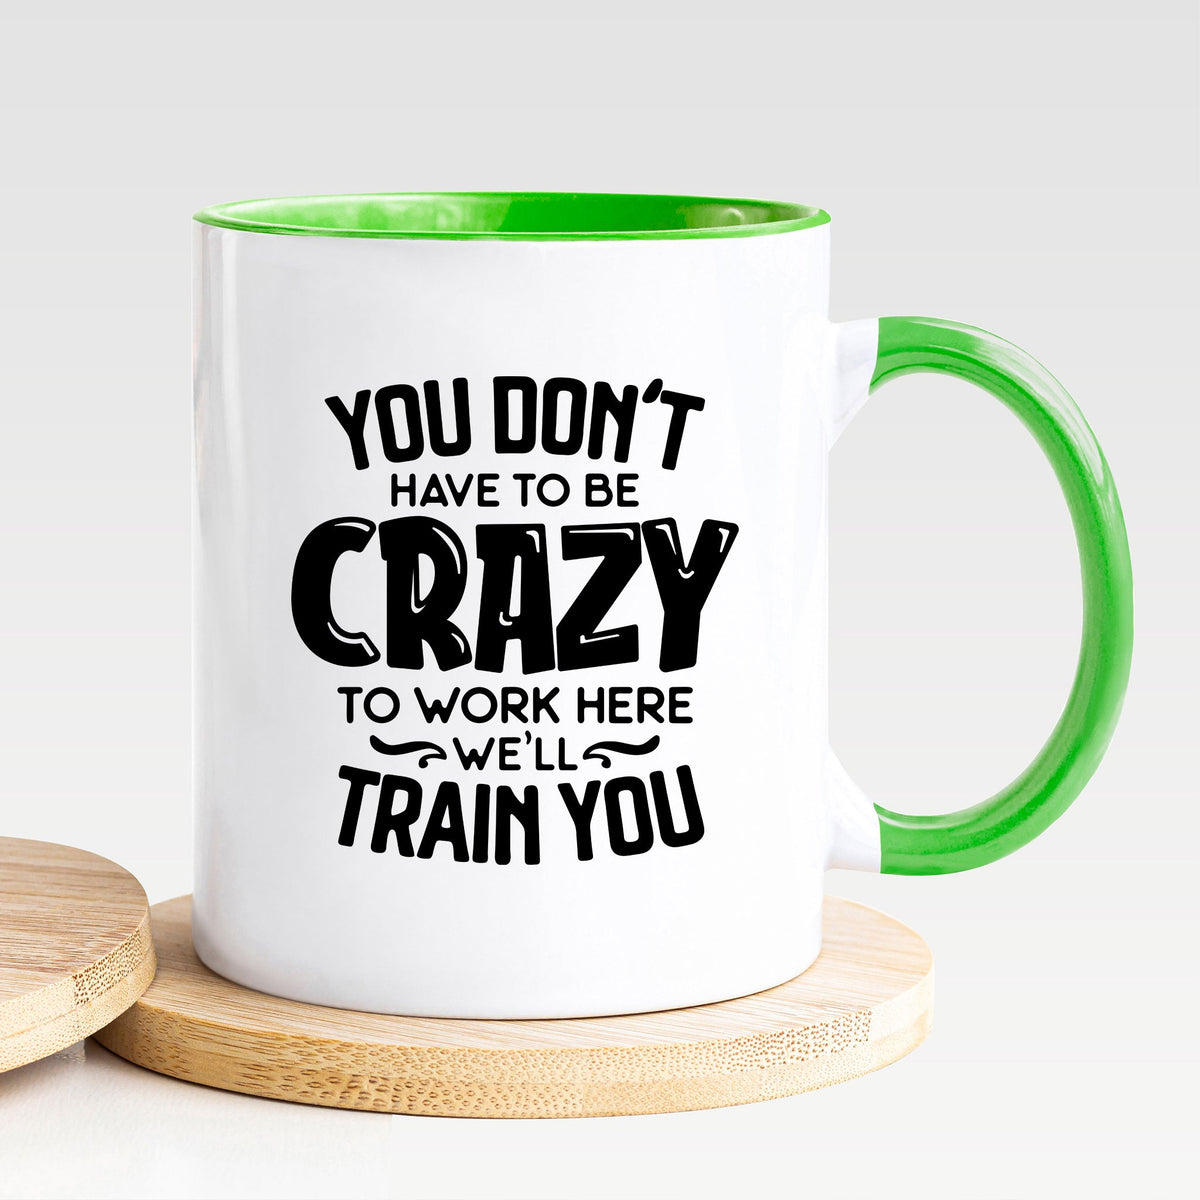 Don't Have To Be Crazy To Work Here We'll Train You - Mug - Nola Charm